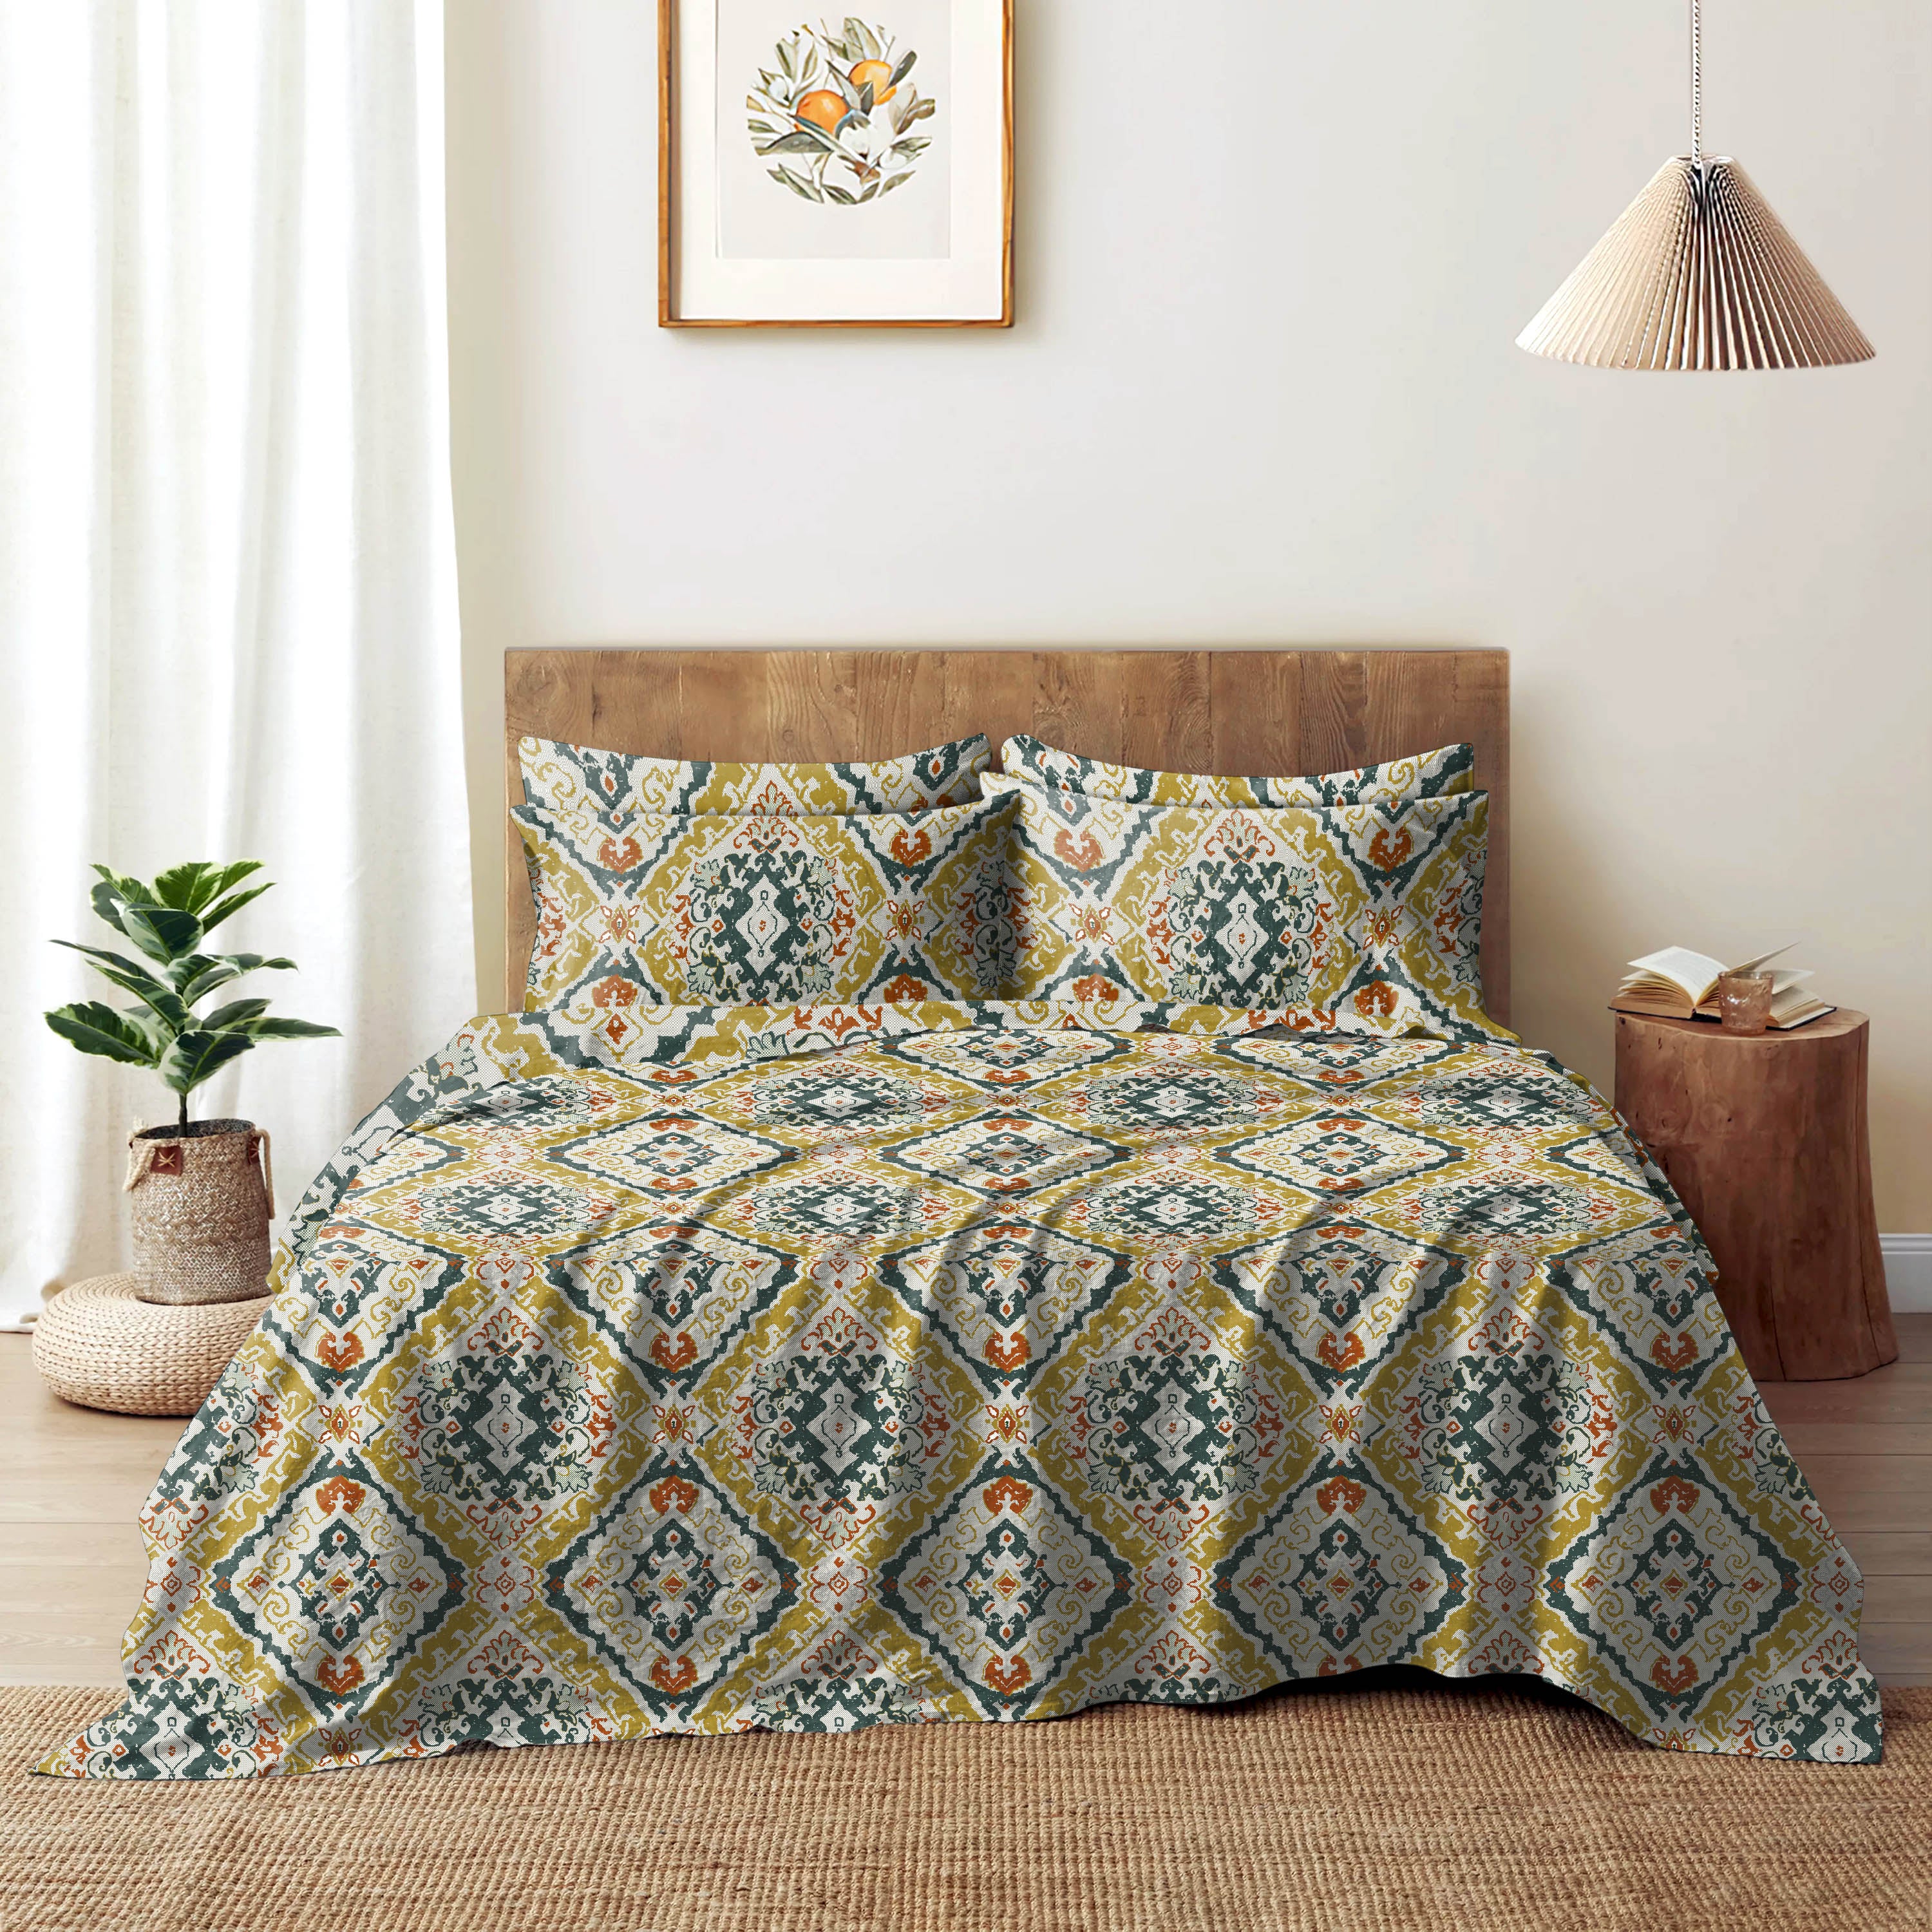 MOROCCO CORN BEDSHEET FOR DOUBLE BED WITH 2 PILLOWCOVERS SIZE (104" X 90")